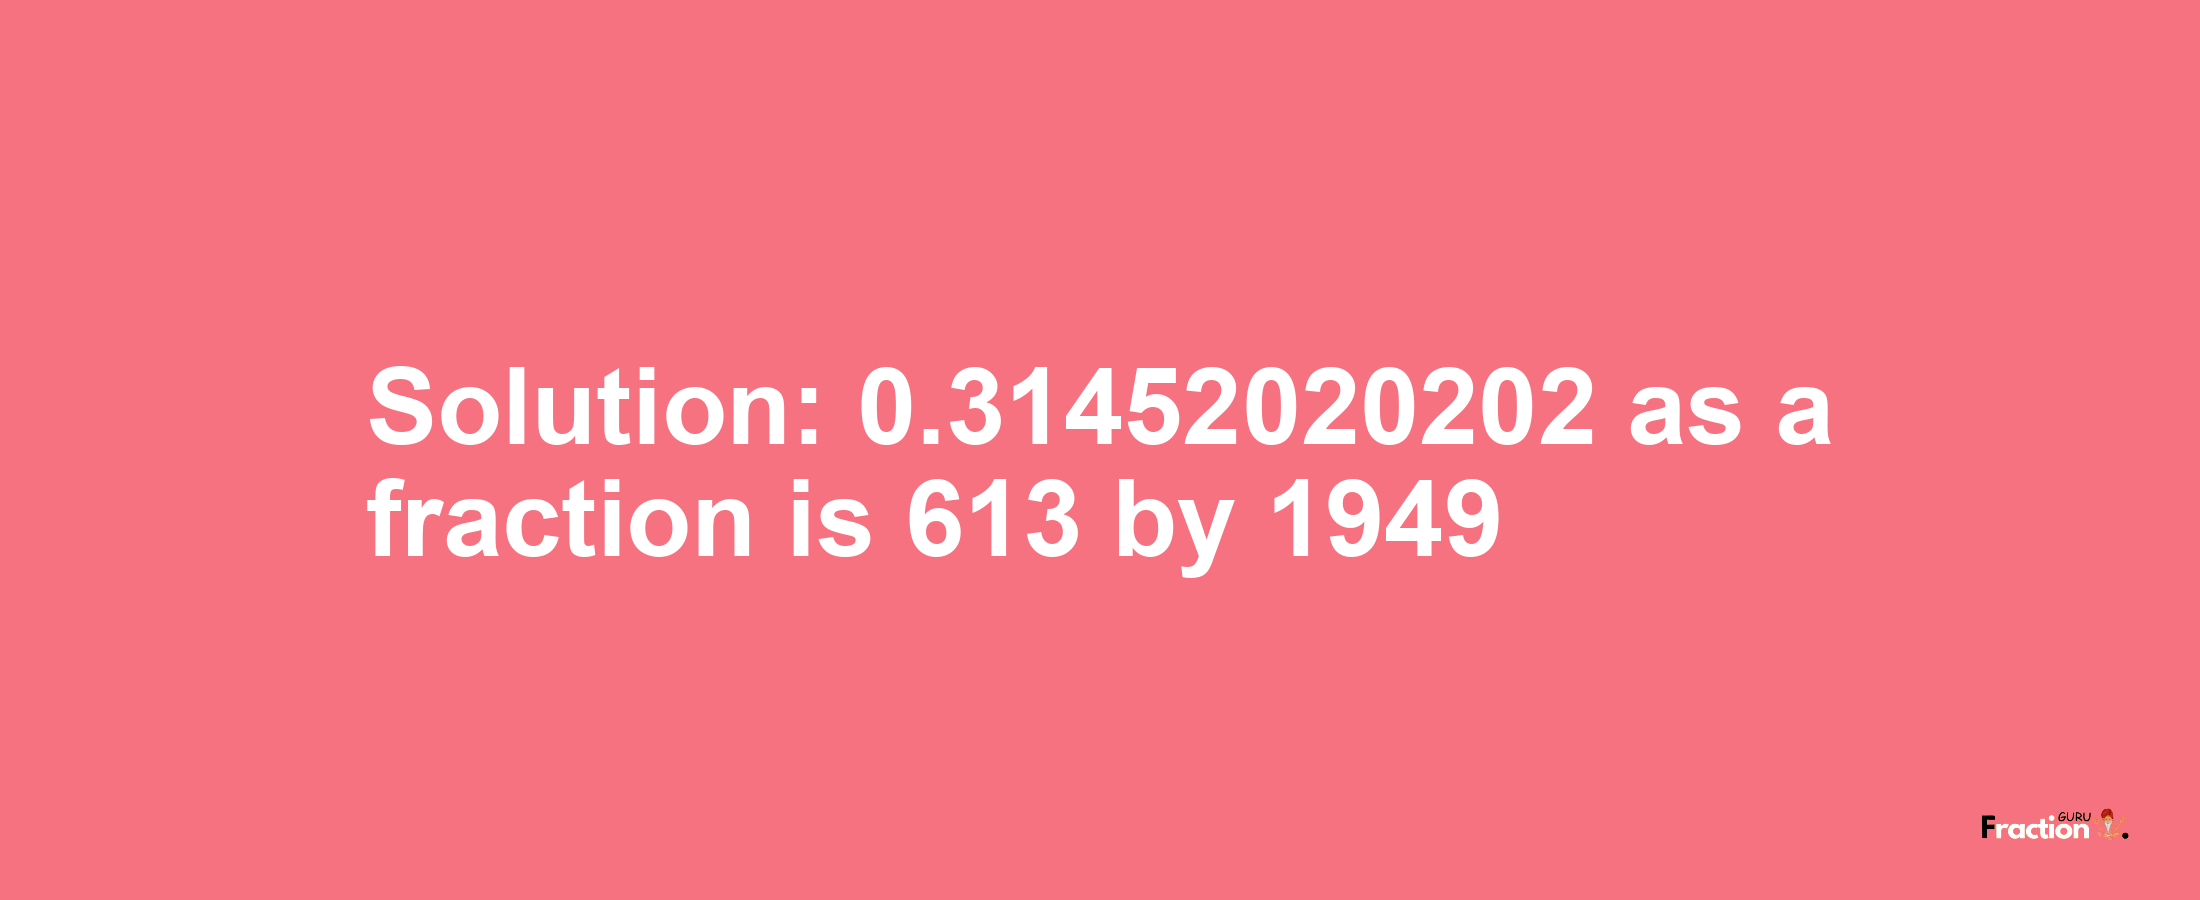 Solution:0.31452020202 as a fraction is 613/1949